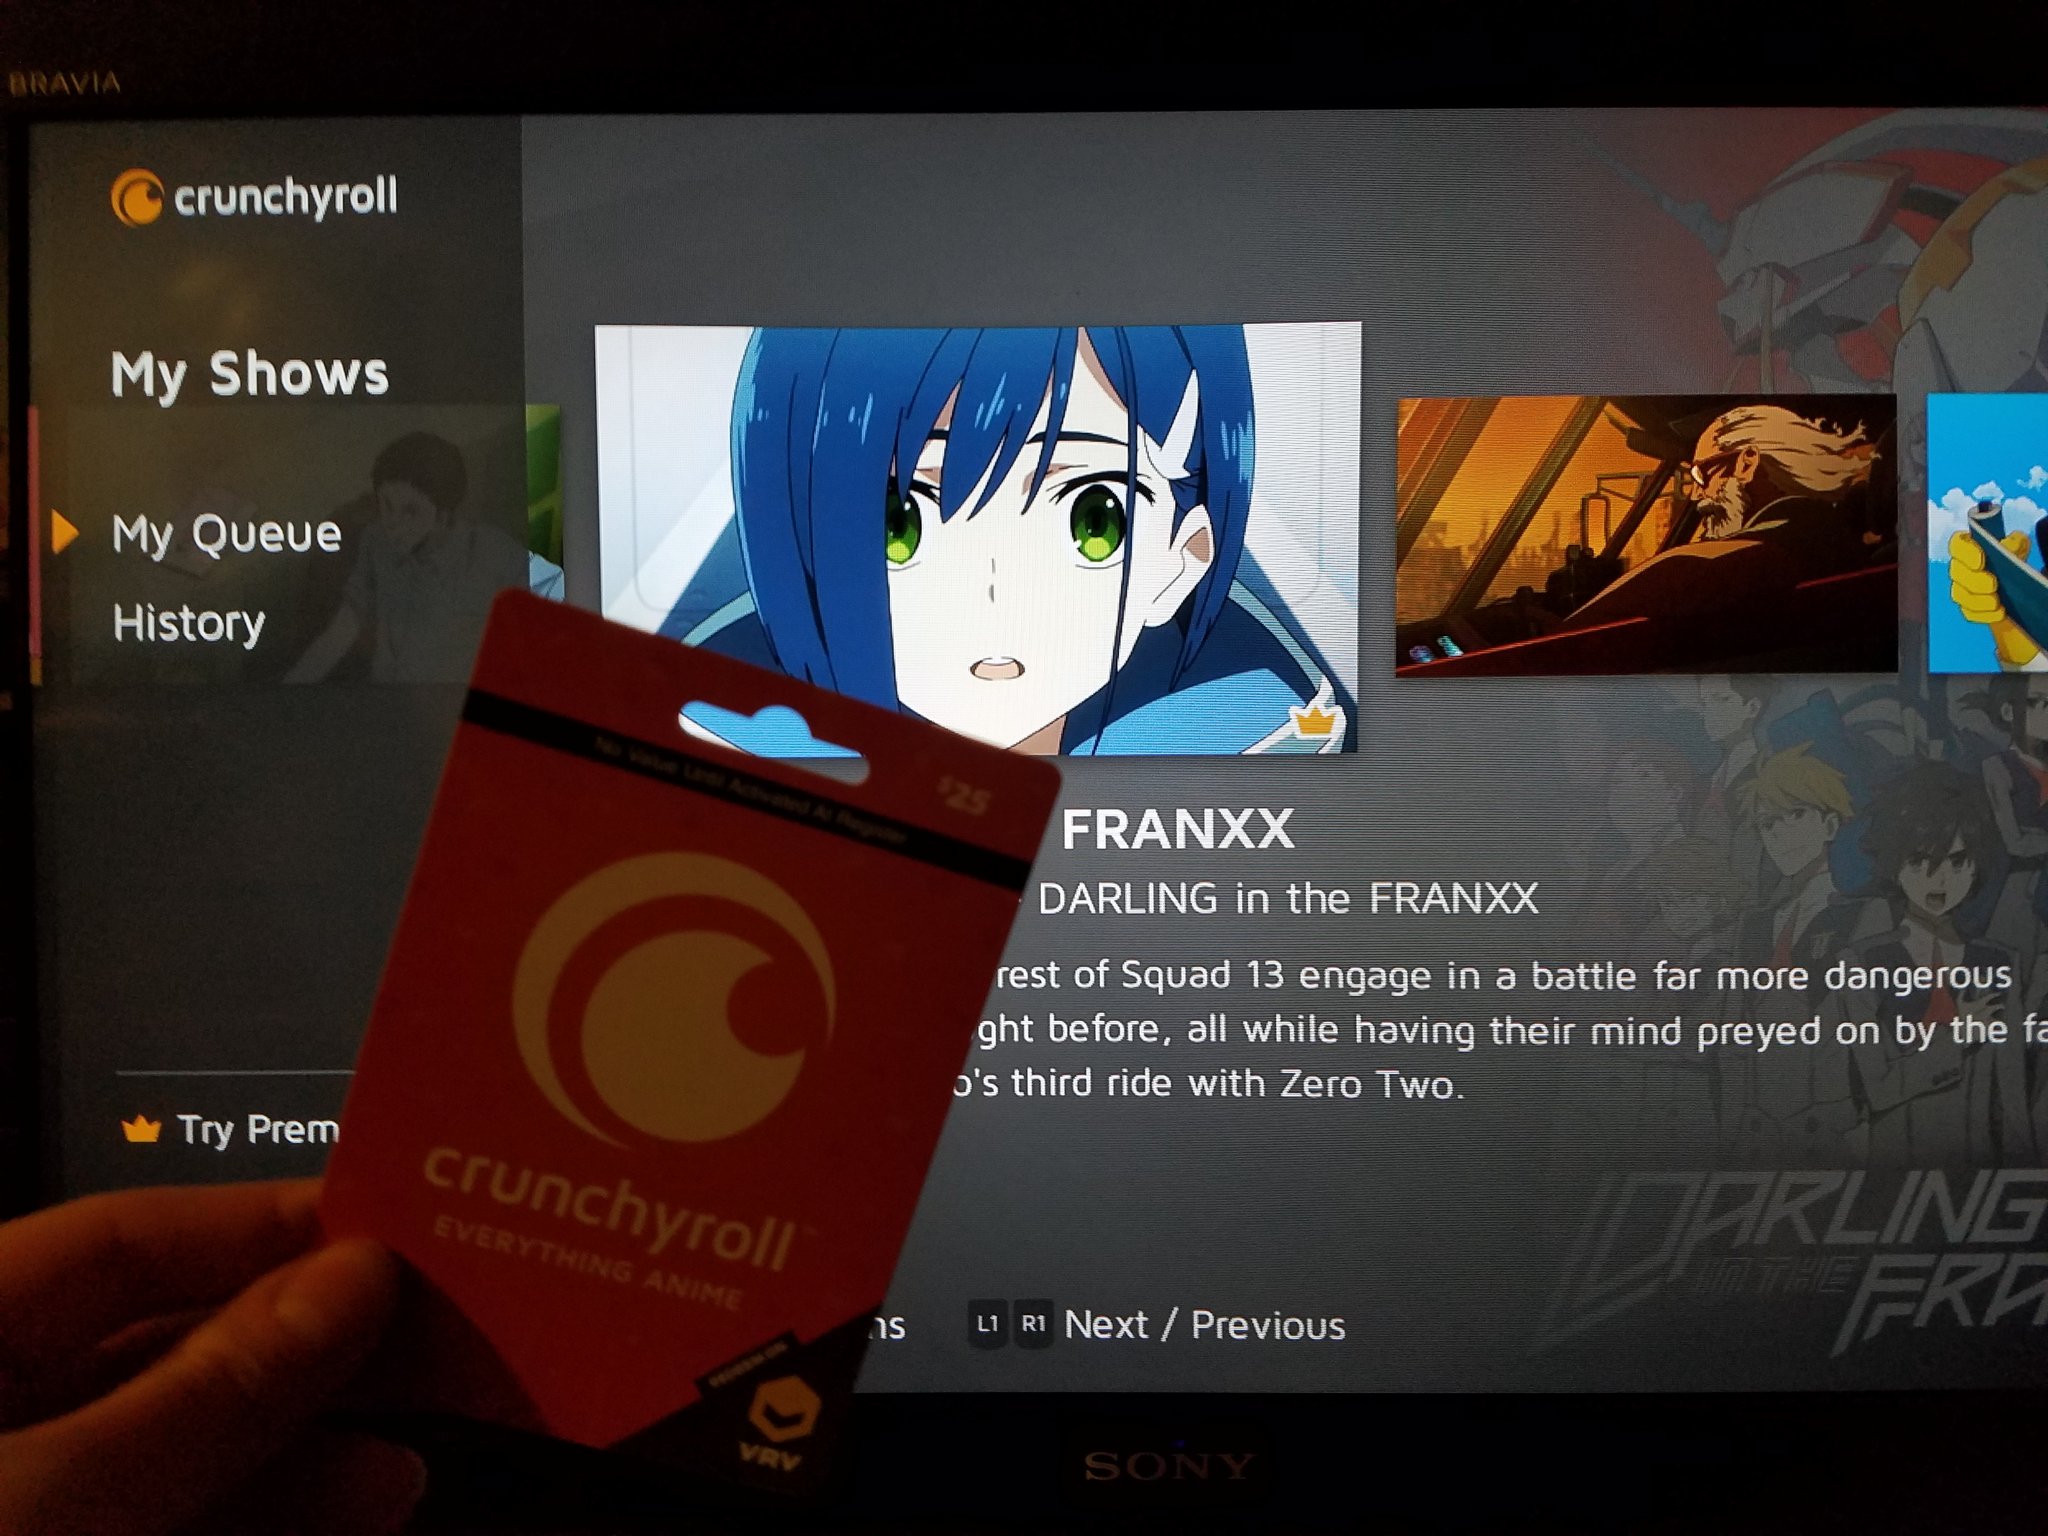 Graph🐶👉🐄 on "@Crunchyroll Hi, I view Crunchyroll on my ps4 and this card to go premium, but does I have to use the separate VRV app (along with